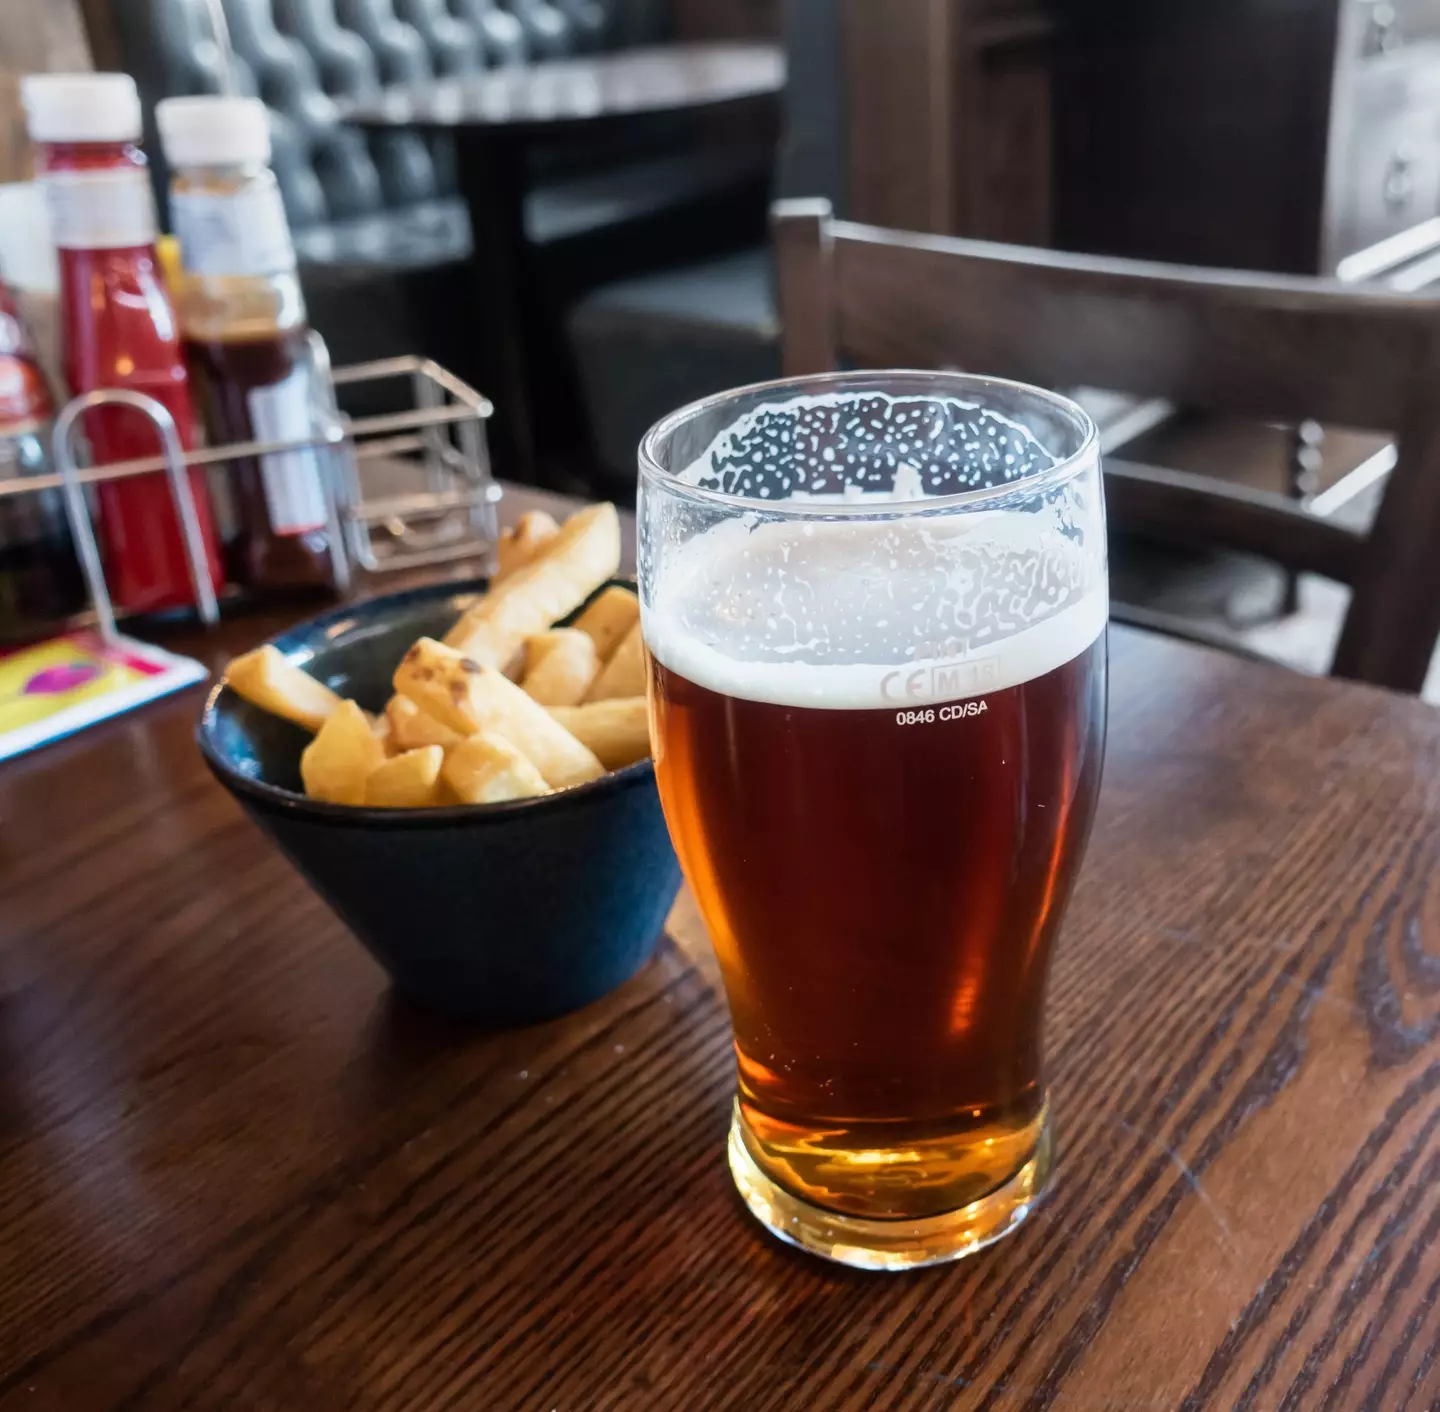 Typically, the higher pint prices are coming in big cities and airports.